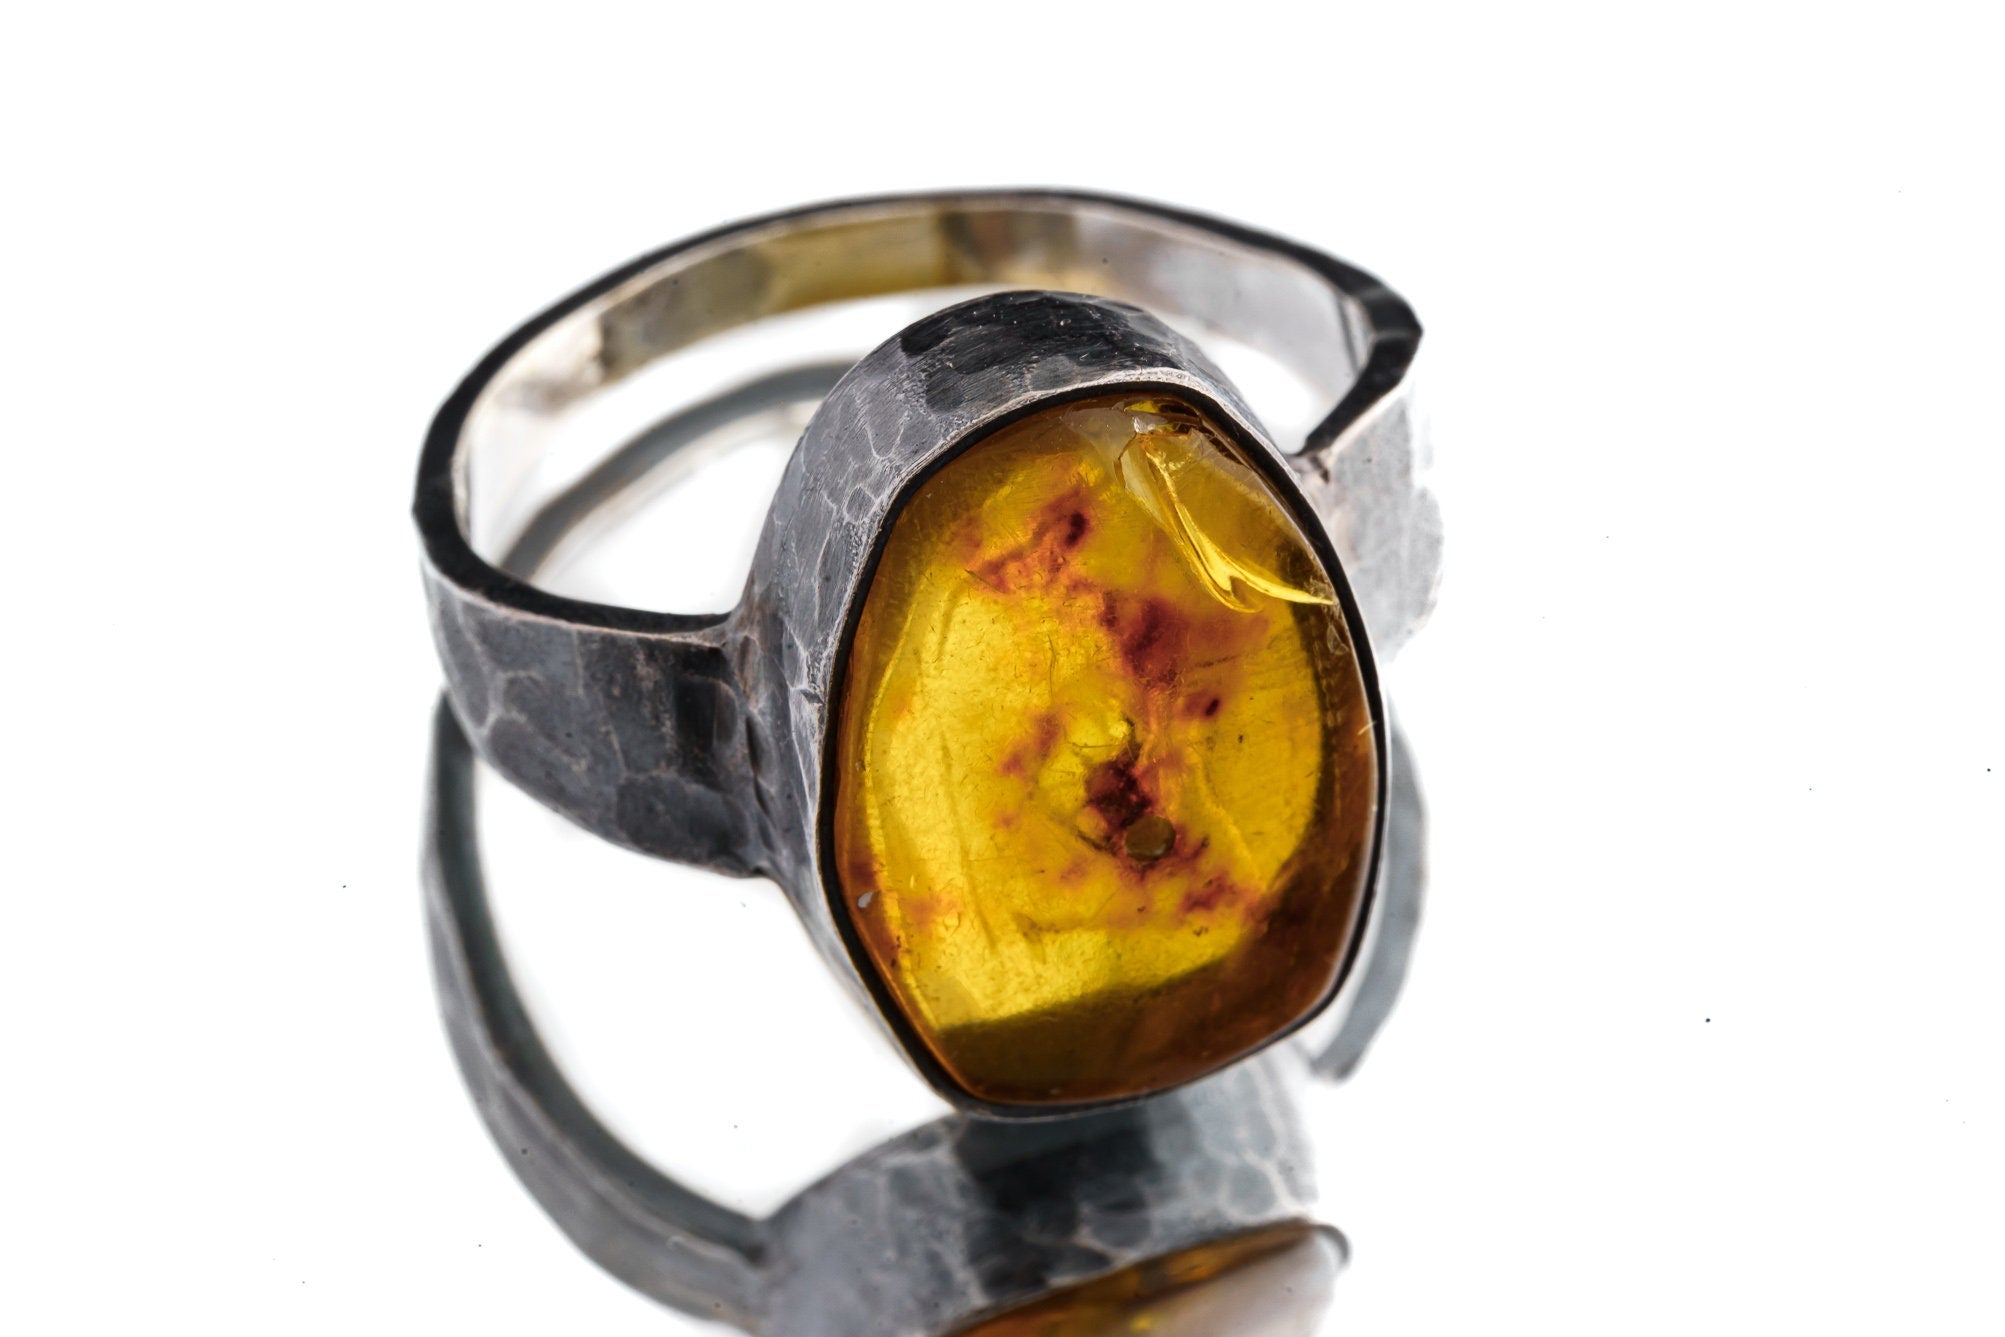 Freeform Mexican Amber Beat - Unisex / Men - Large Crystal Ring - Size 14 US - 925 Sterling Silver - Hammer Textured & Oxidised